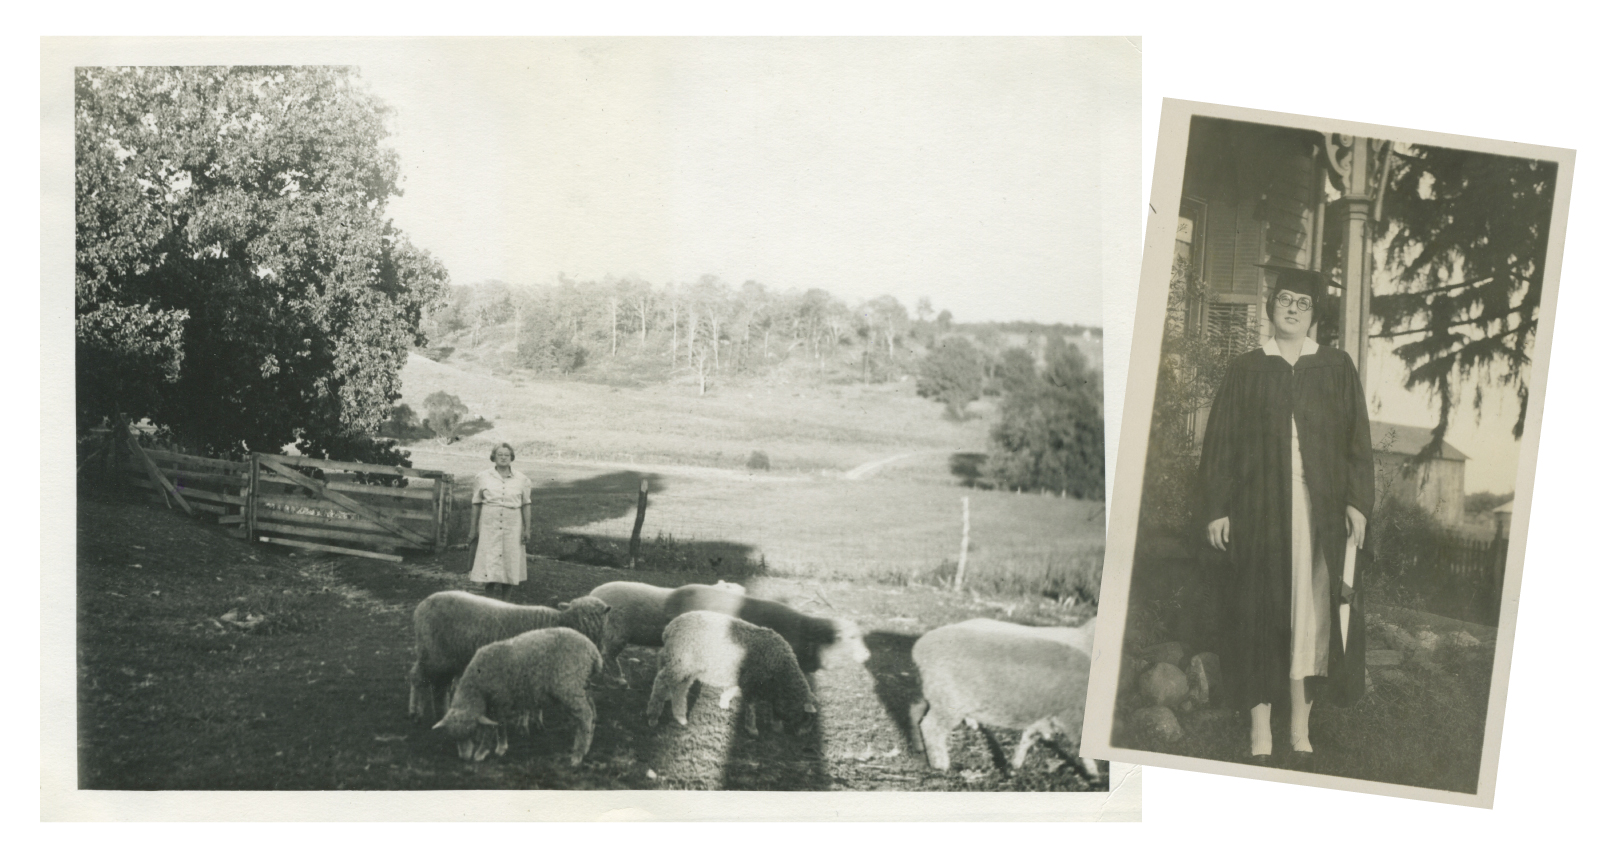 Lessons on the Land: Anna Hobart looks after the sheep on the farm, just a few of the animals that called the place home (left). Dorothy Hobart on her ز,Ȳַ
######### graduation day in 1925 (right).